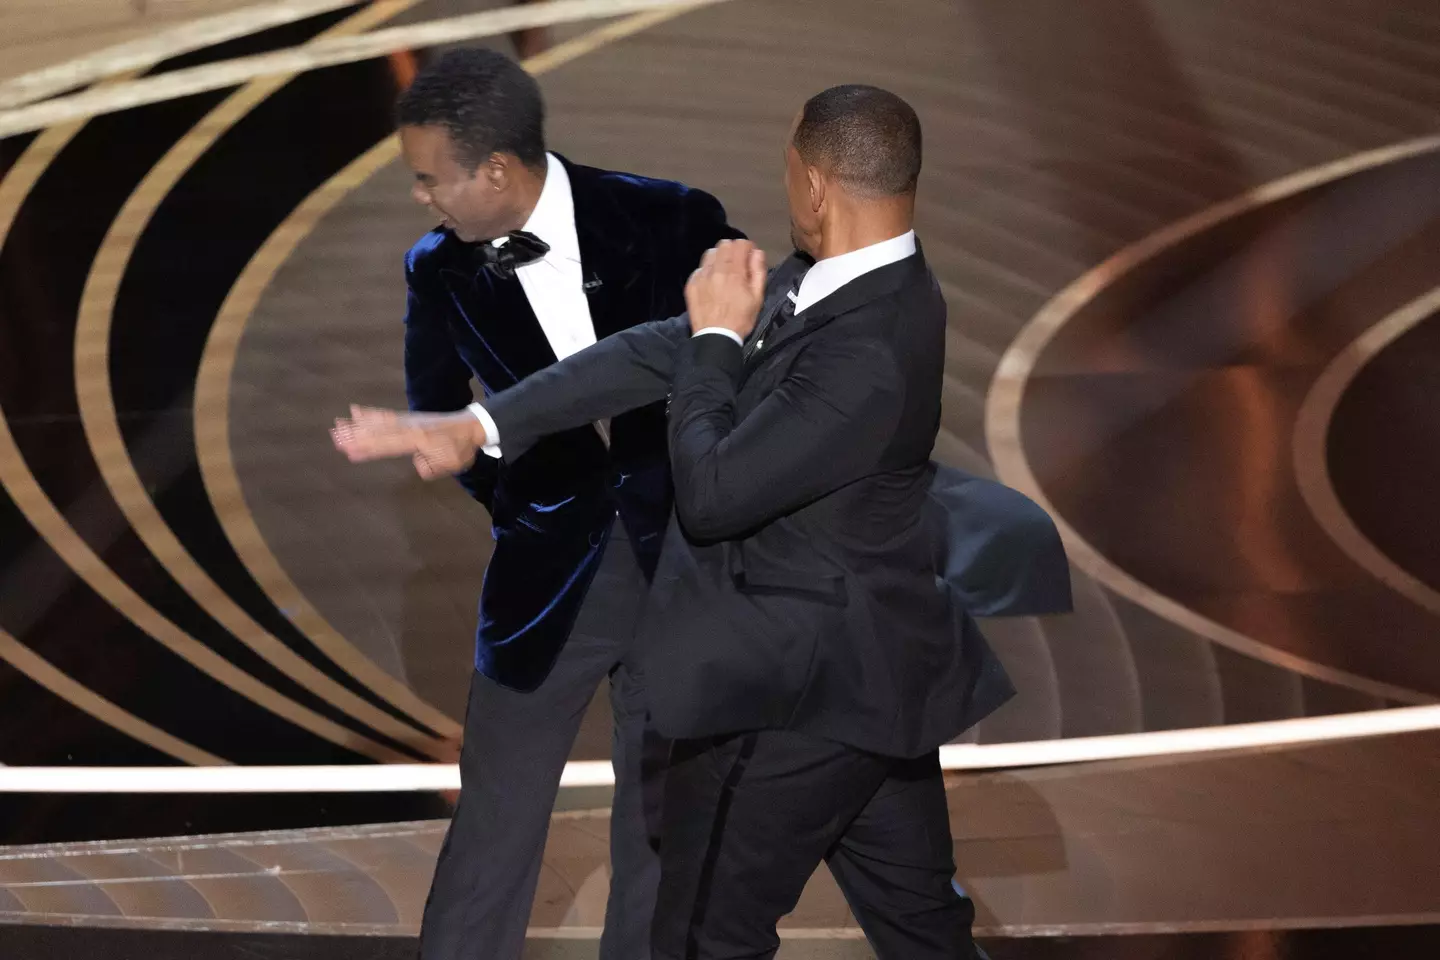 Will Smith smacked Chris Rock during the Oscars.